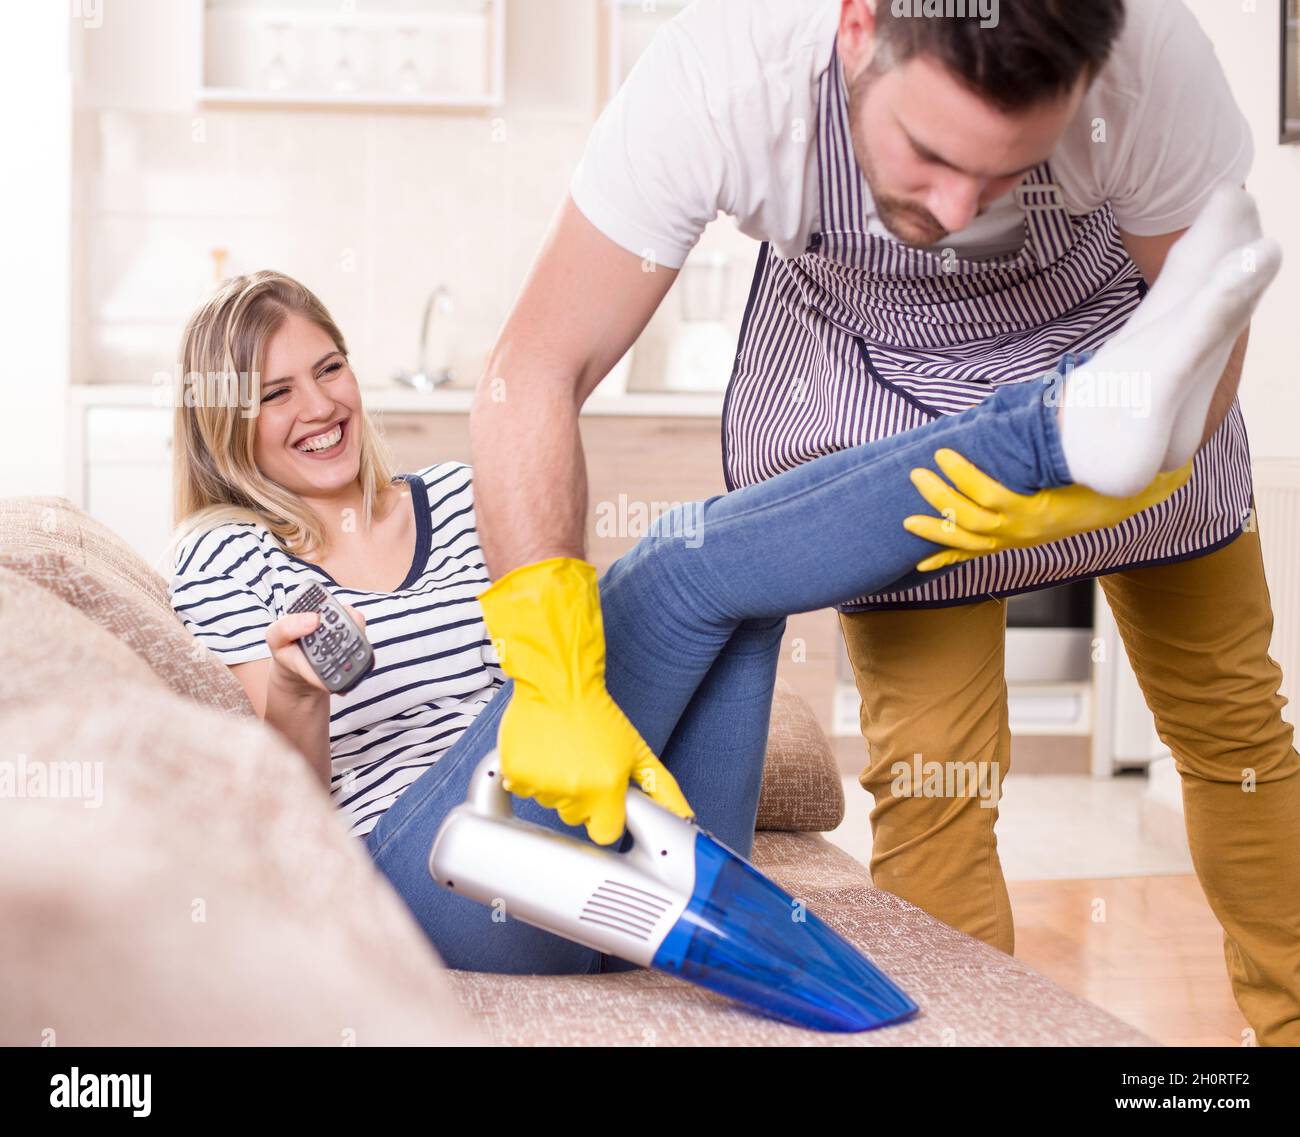 Young man with apron vacuuming sofa with attractive woman sitting and watching tv. Woman enjoying while husband doing chores Stock Photo